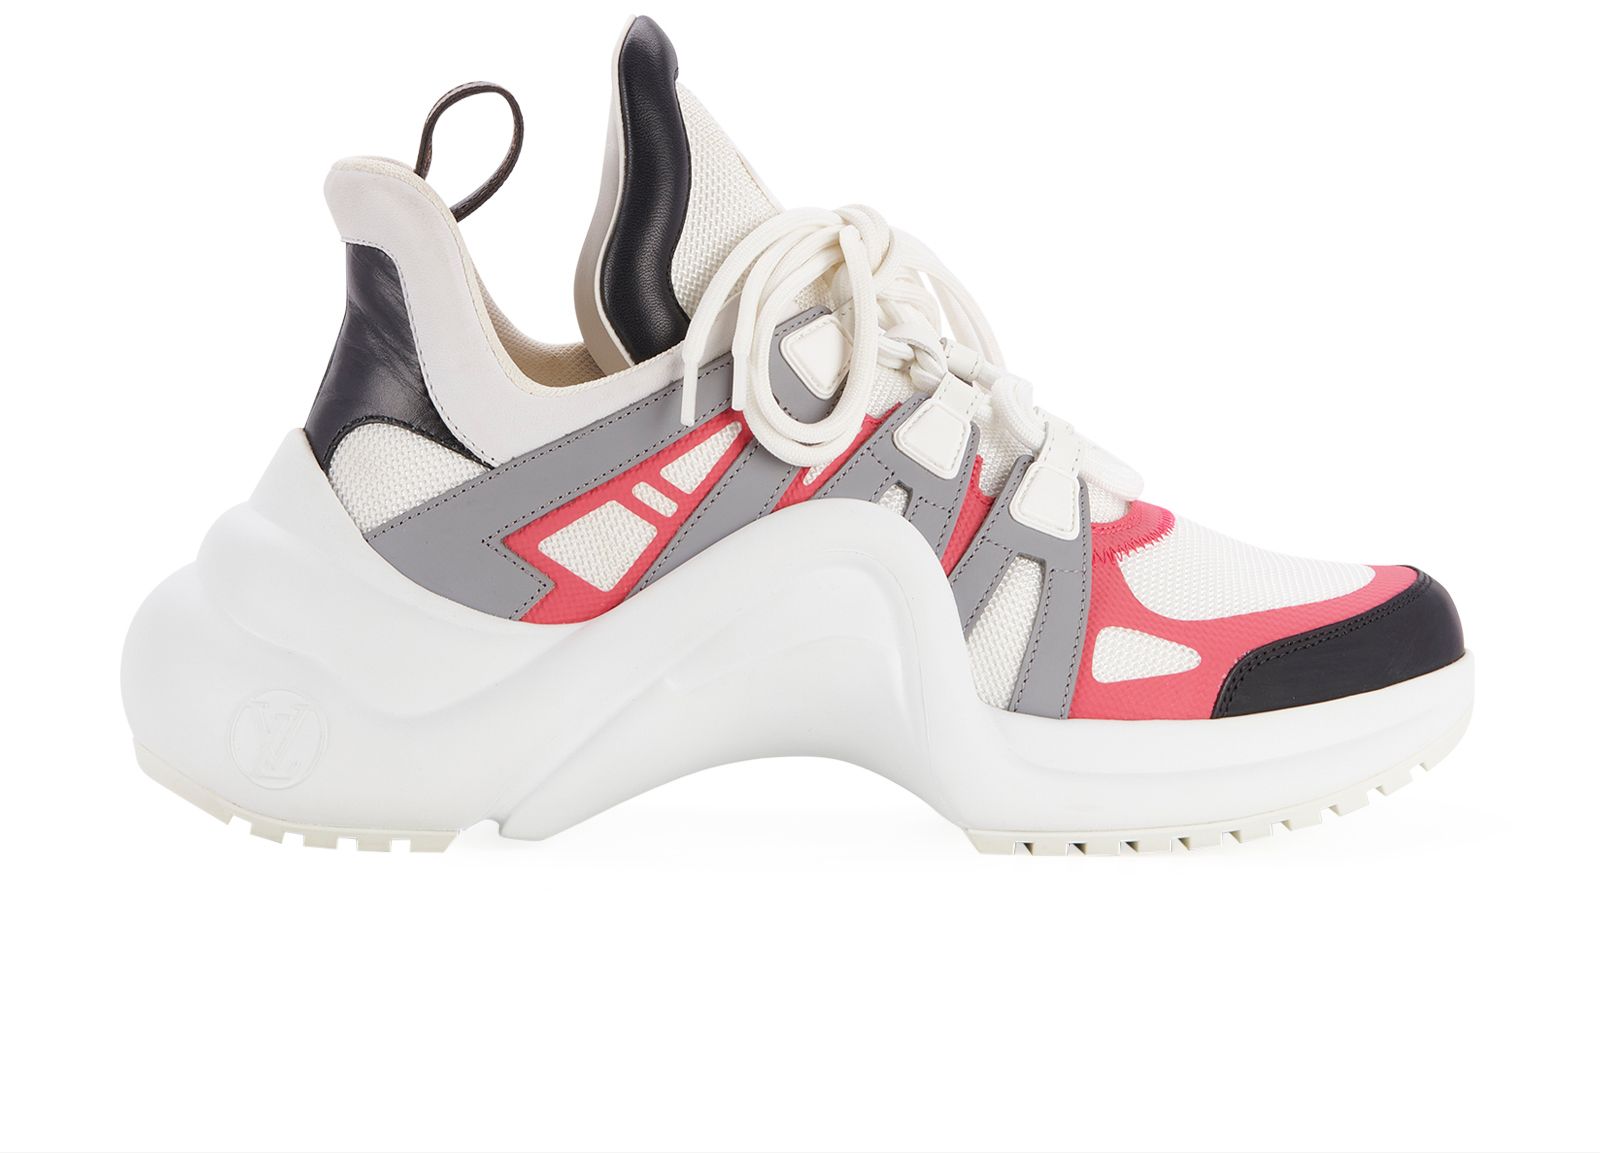 LV Archlight Trainers - Luxury Pink